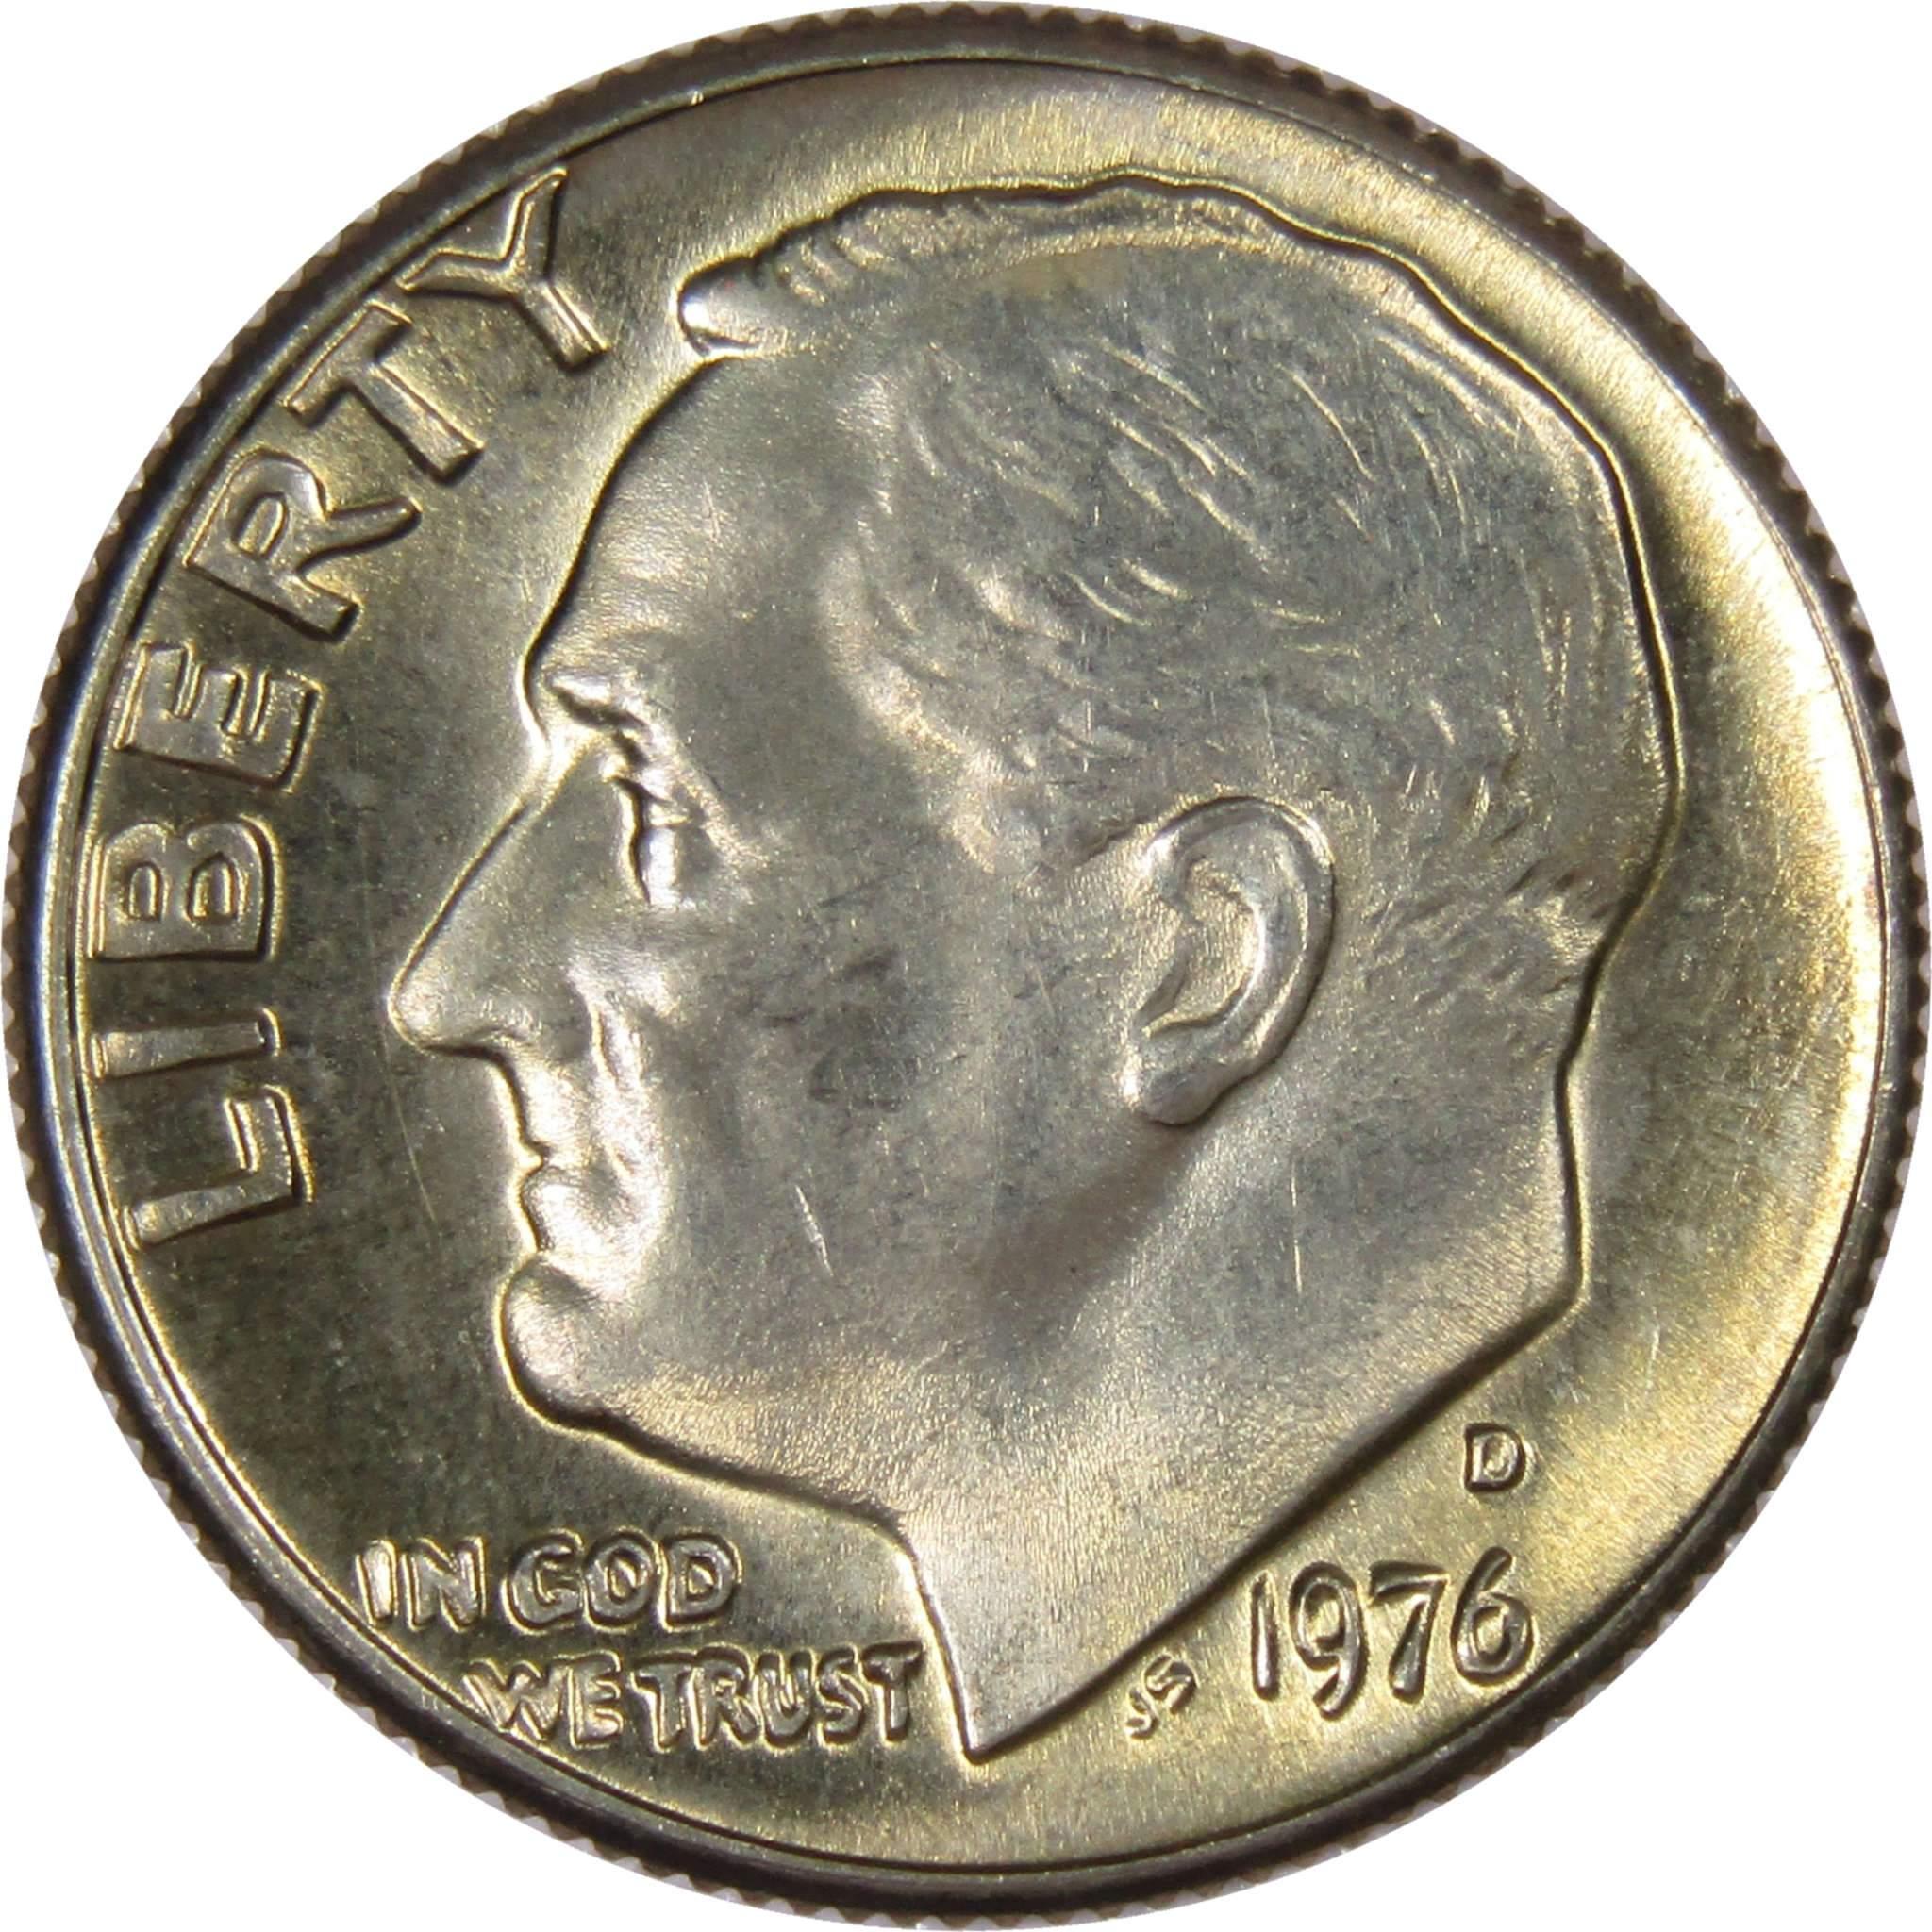 1976 D Roosevelt Dime BU Uncirculated Mint State 10c US Coin Collectible